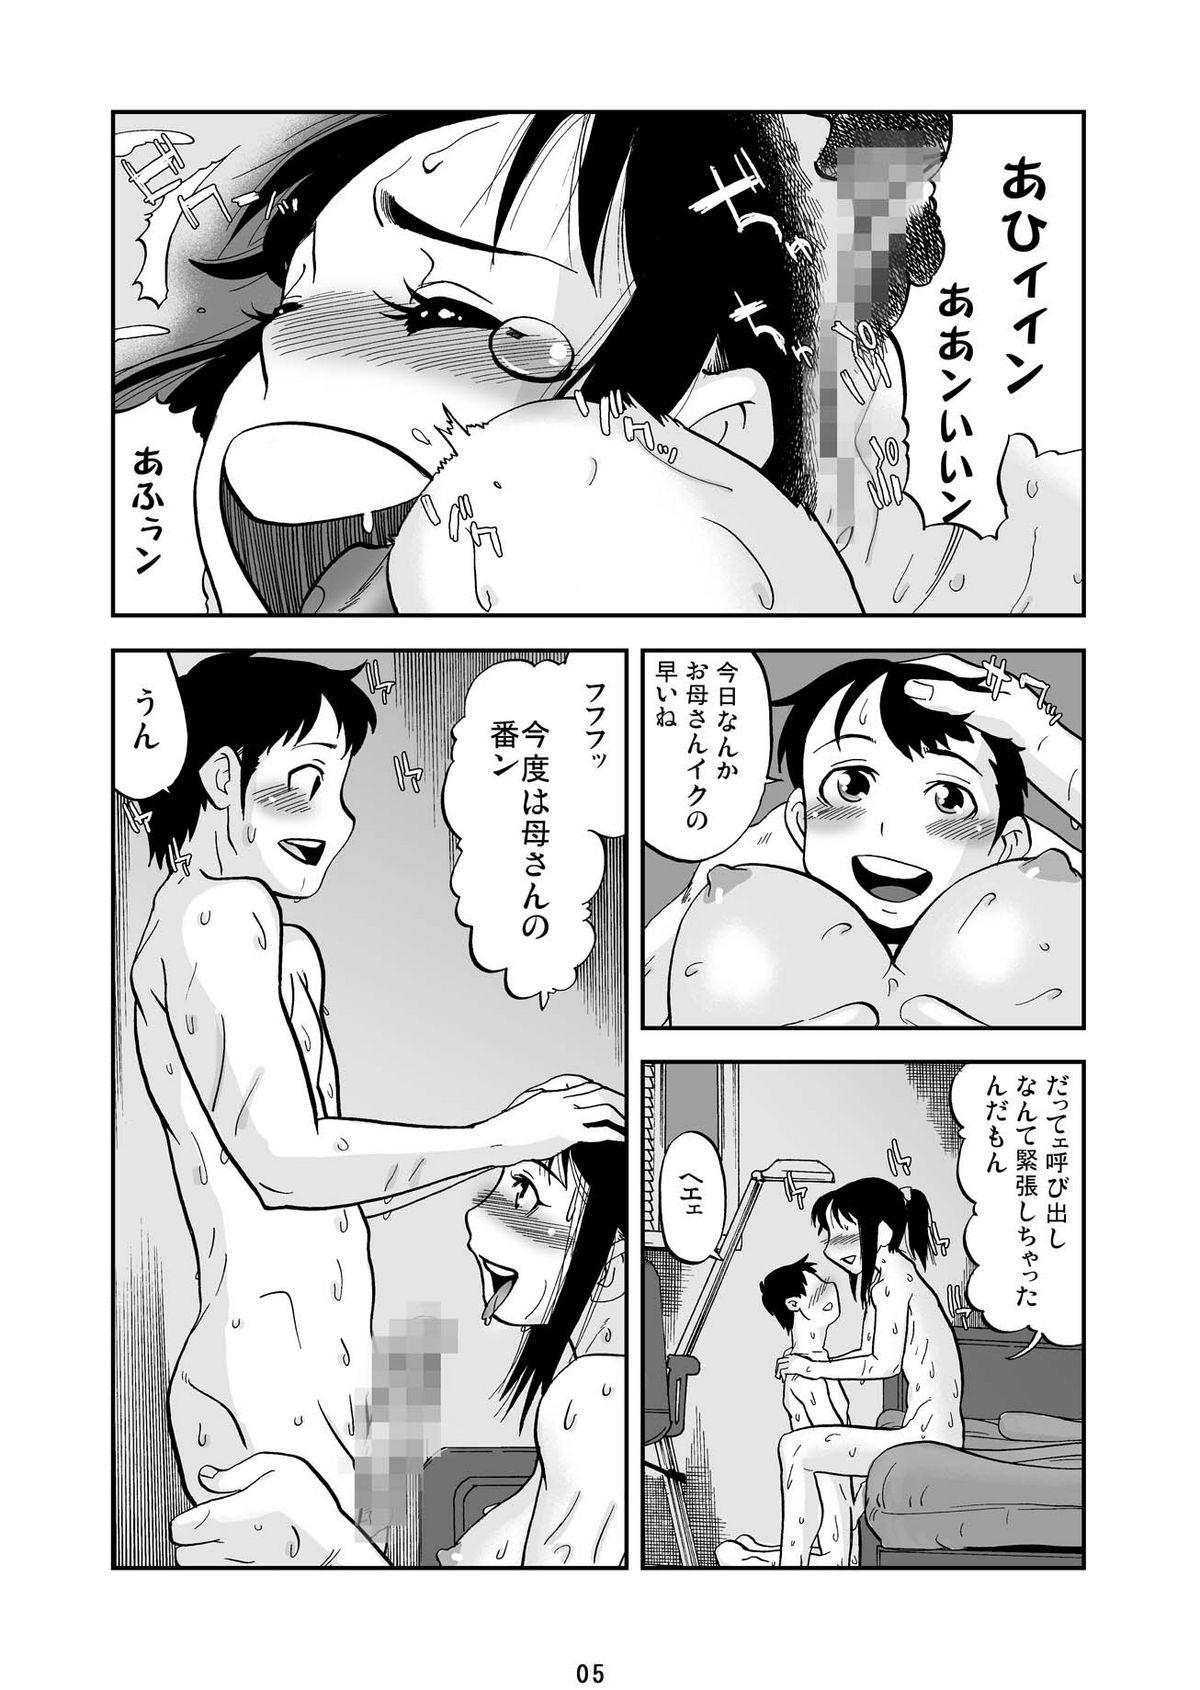 Pick Up 母子禁 VOL.01 Transsexual - Page 6